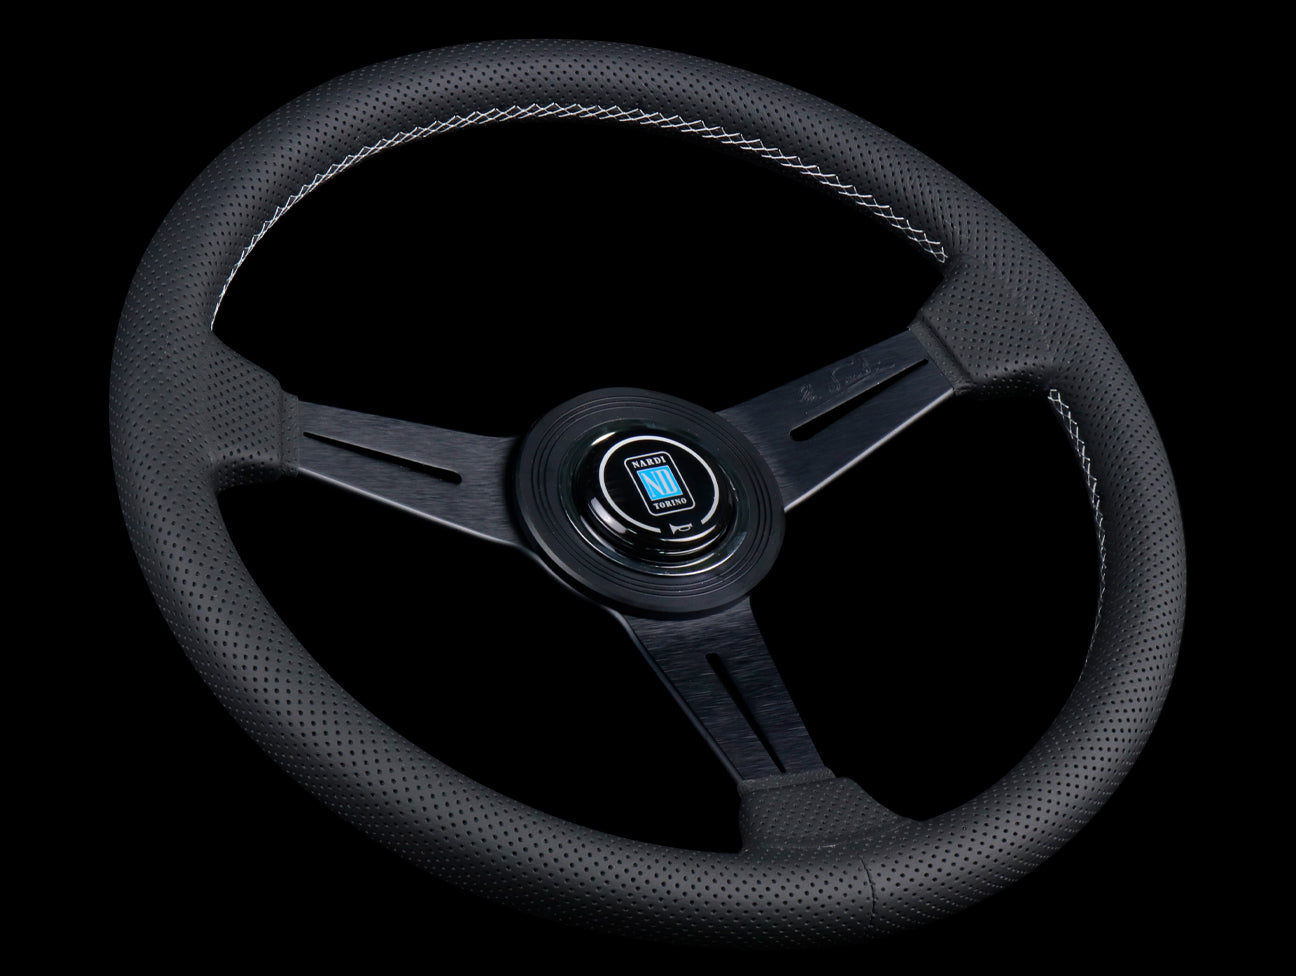 Nardi Classic 340mm Steering Wheel - Black Perforated Leather / Grey Stitch